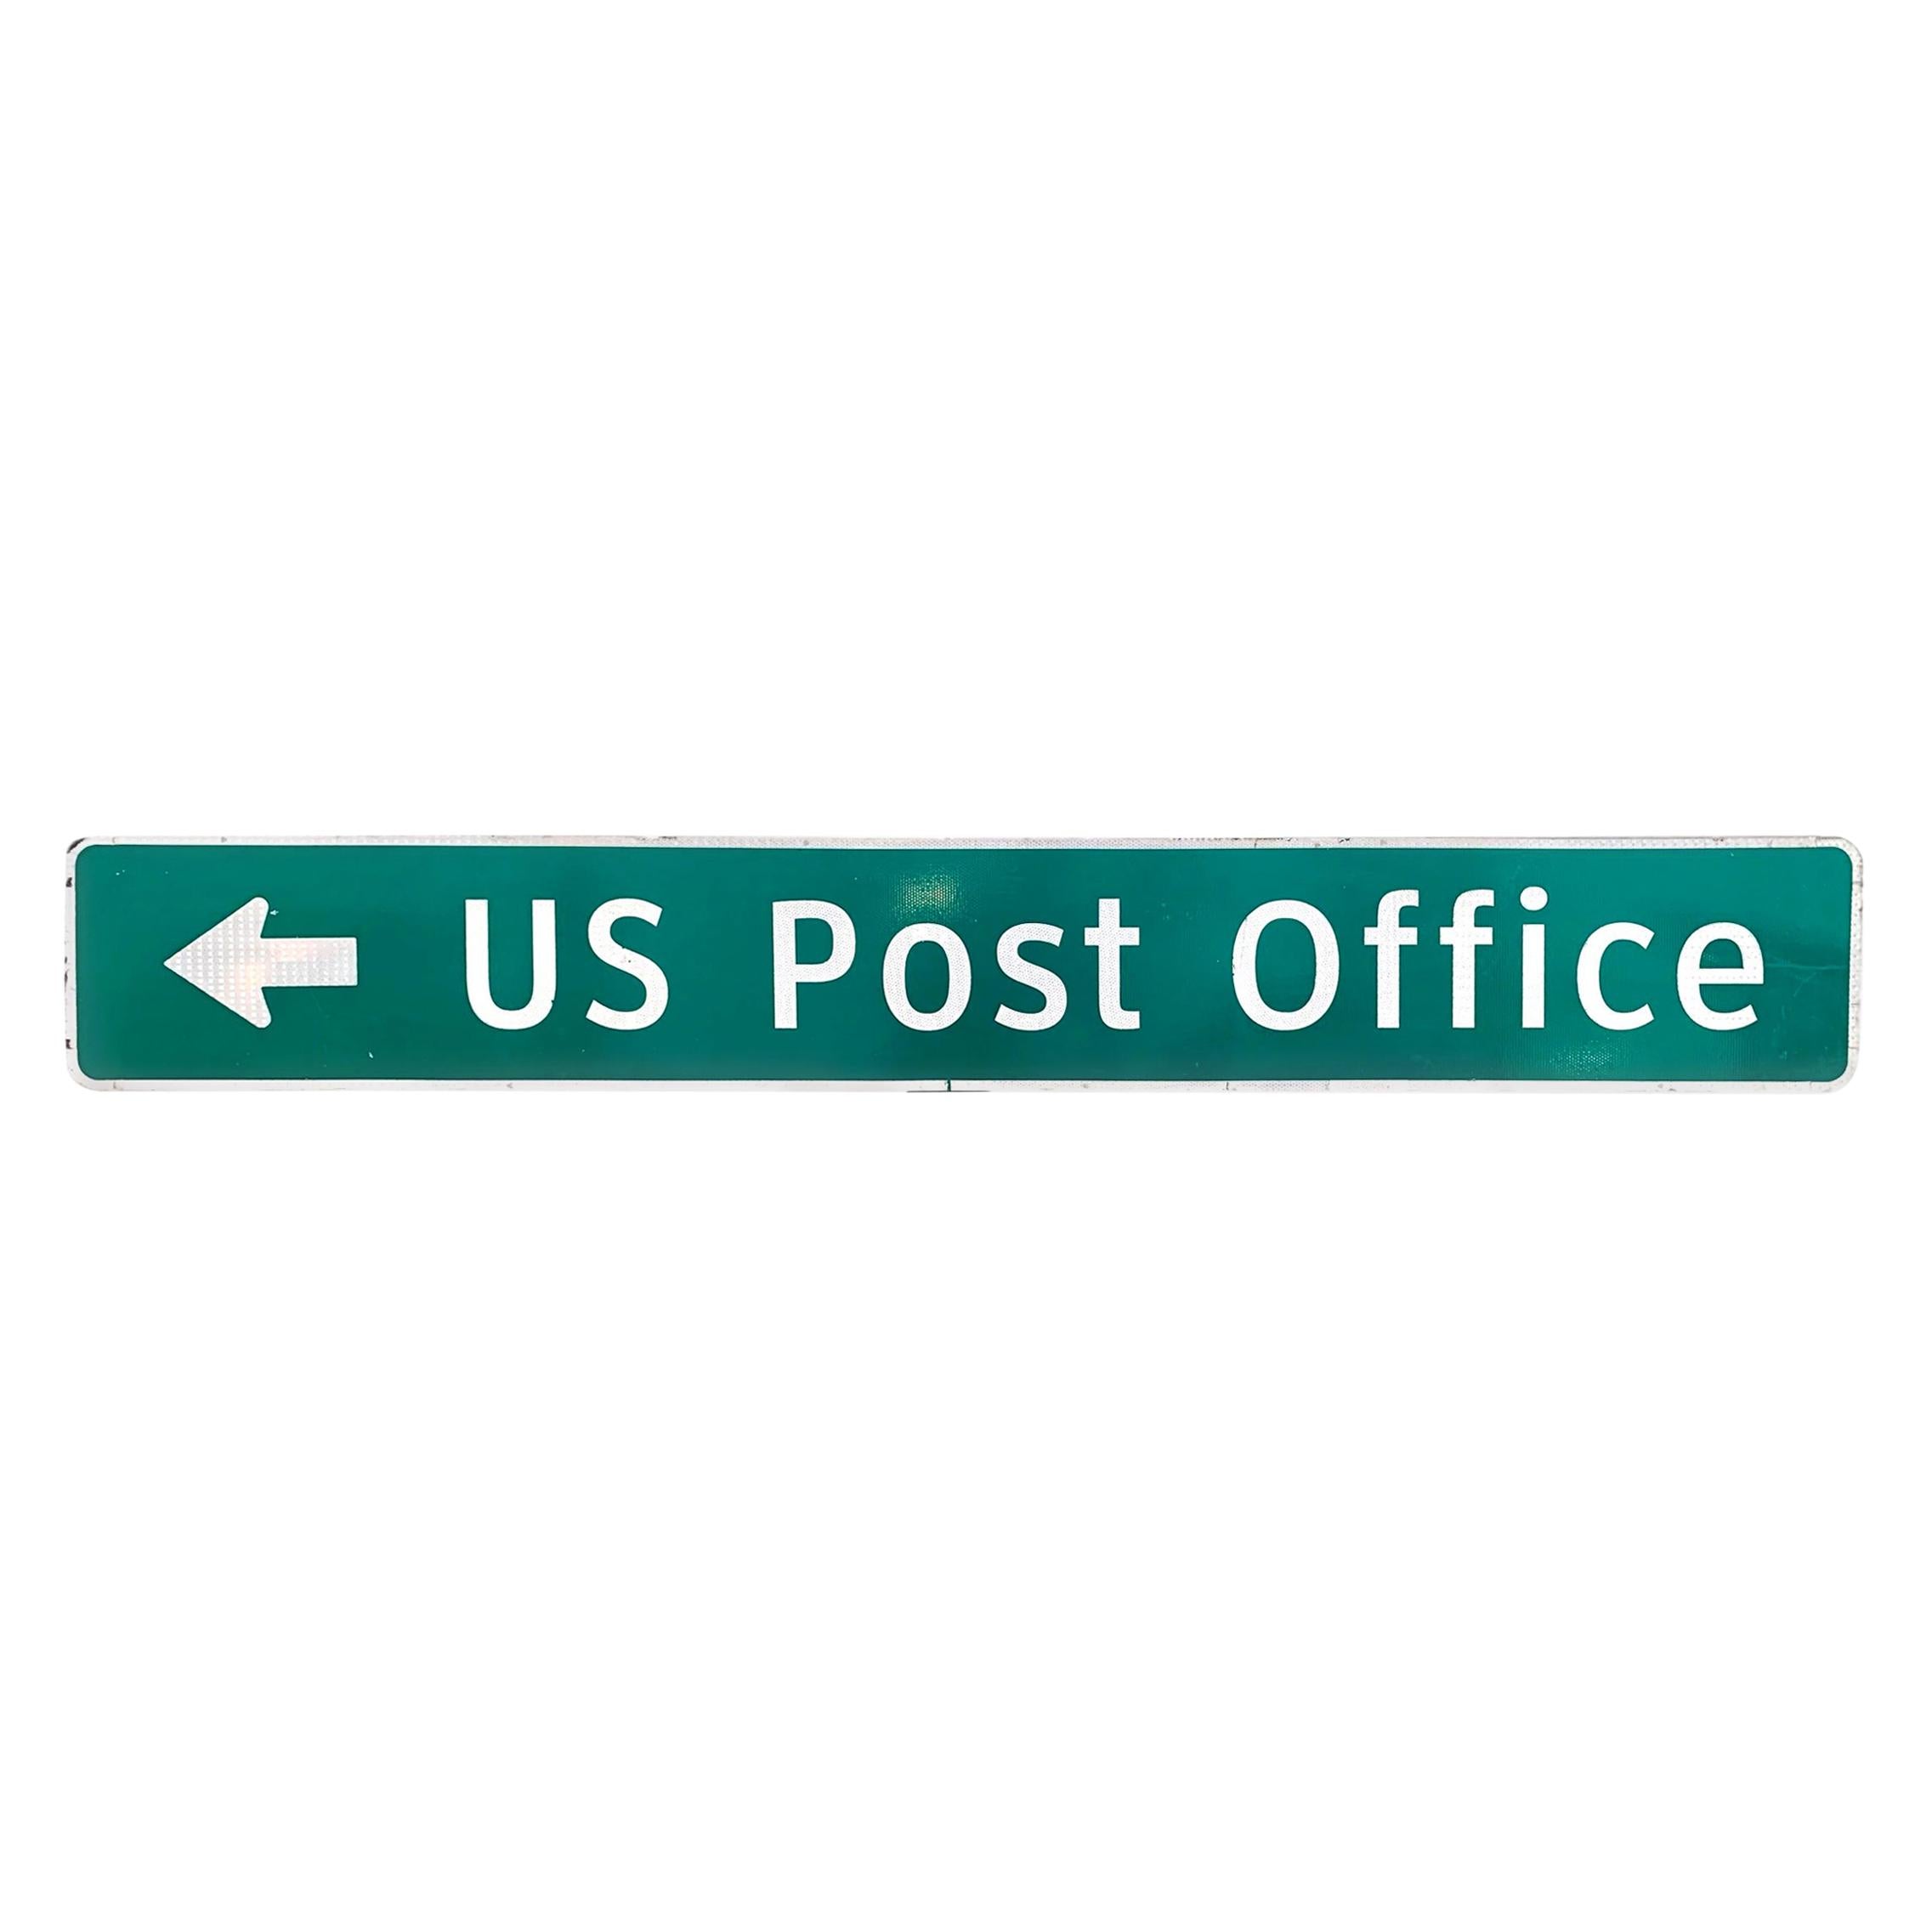 US Post Office Highway Sign